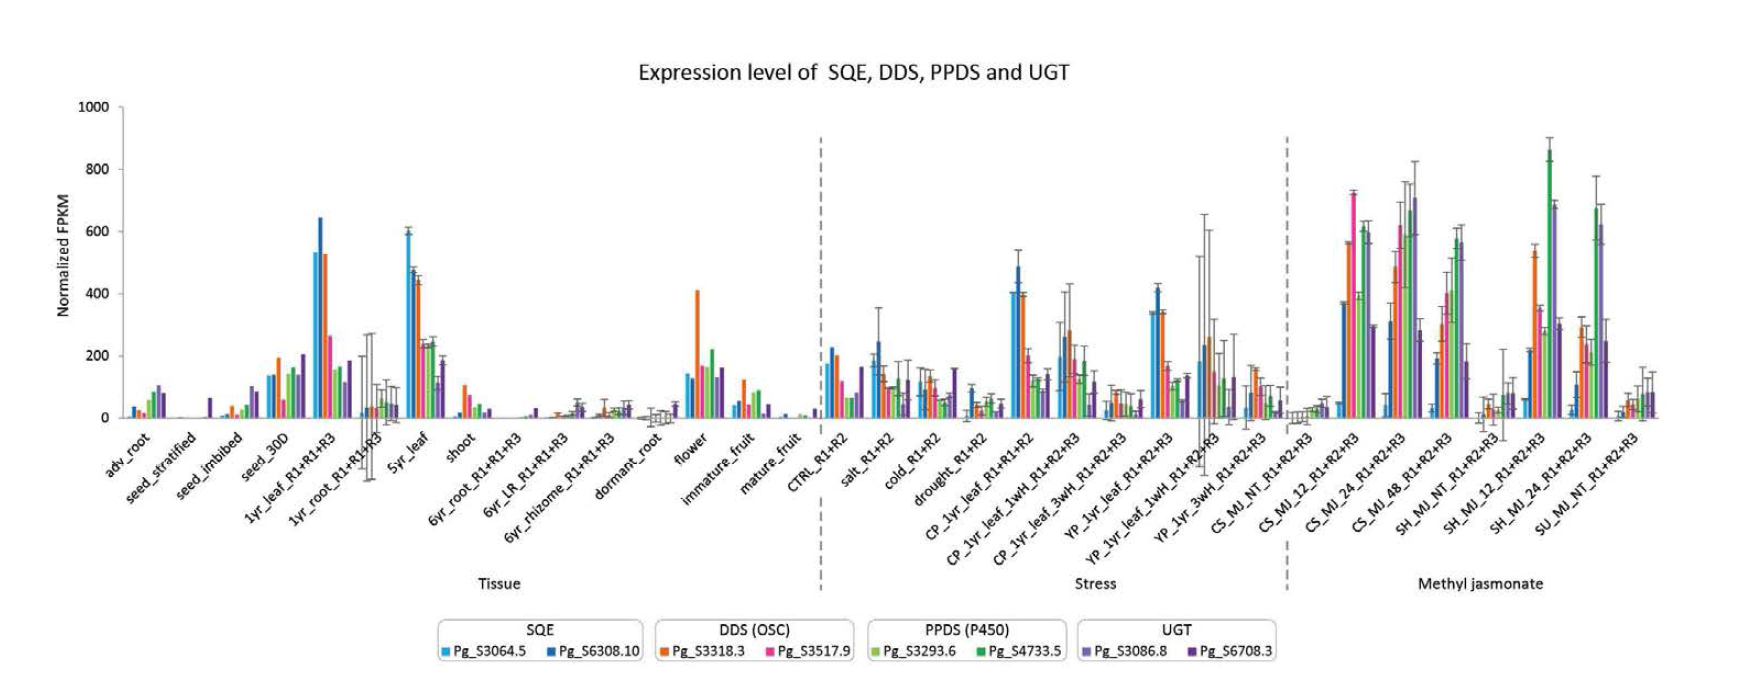 Co-expression of SQE, DDS, PPDS and UGT genes. RNA-seq data for selected genes are shown. In tissue; Adv_root: adventitious root, Seed_30D: 30 days old seedling. In Stress; CTRL: control, salt: 100 mM NaCl for 24 h, cold: 4 °C for 24 h, drought: air-dry for 24 h. Whole plant of 1 year old was used for stress conditions except heat stress. Heat condition was at 30 °C. For example, 3wH means 30°C heat condition for three weeks. In MeJA; NT: non-treated, 12, 24 or 48: 12, 24 or 48 h treatment of 200 μM of MeJA in the liquid suspension of adventitious roots. R1+R2 or R1+R2+R3 means average value of two or three replicates was used, respectively. Error bars represent standard deviations